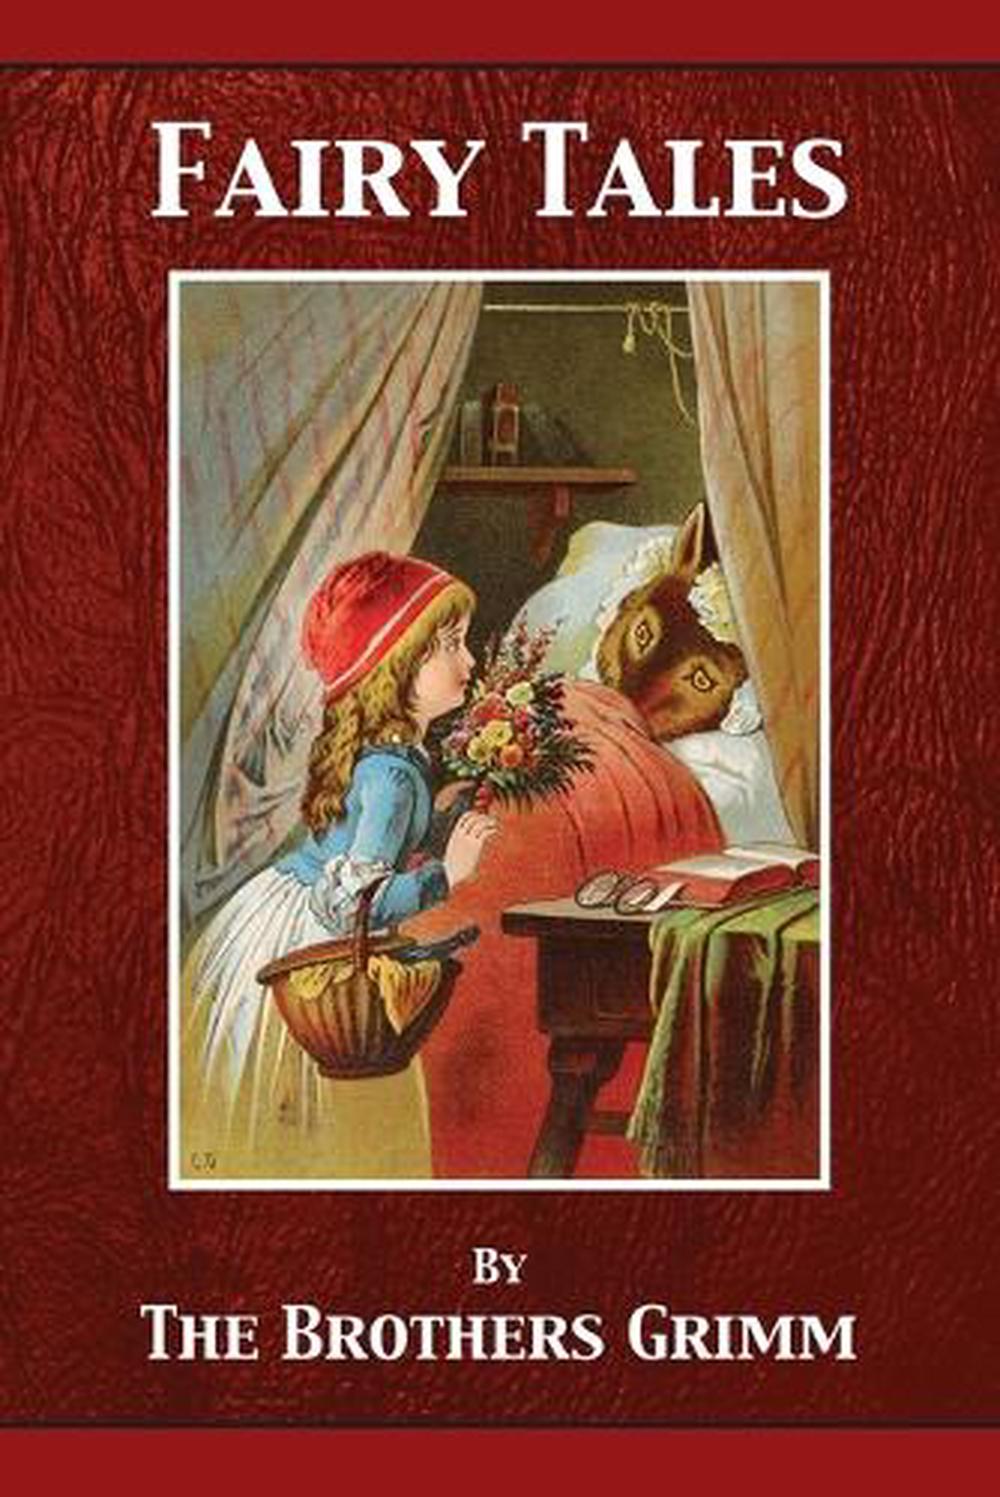 The Original Folk and Fairy Tales of the Brothers Grimm by Jacob Grimm